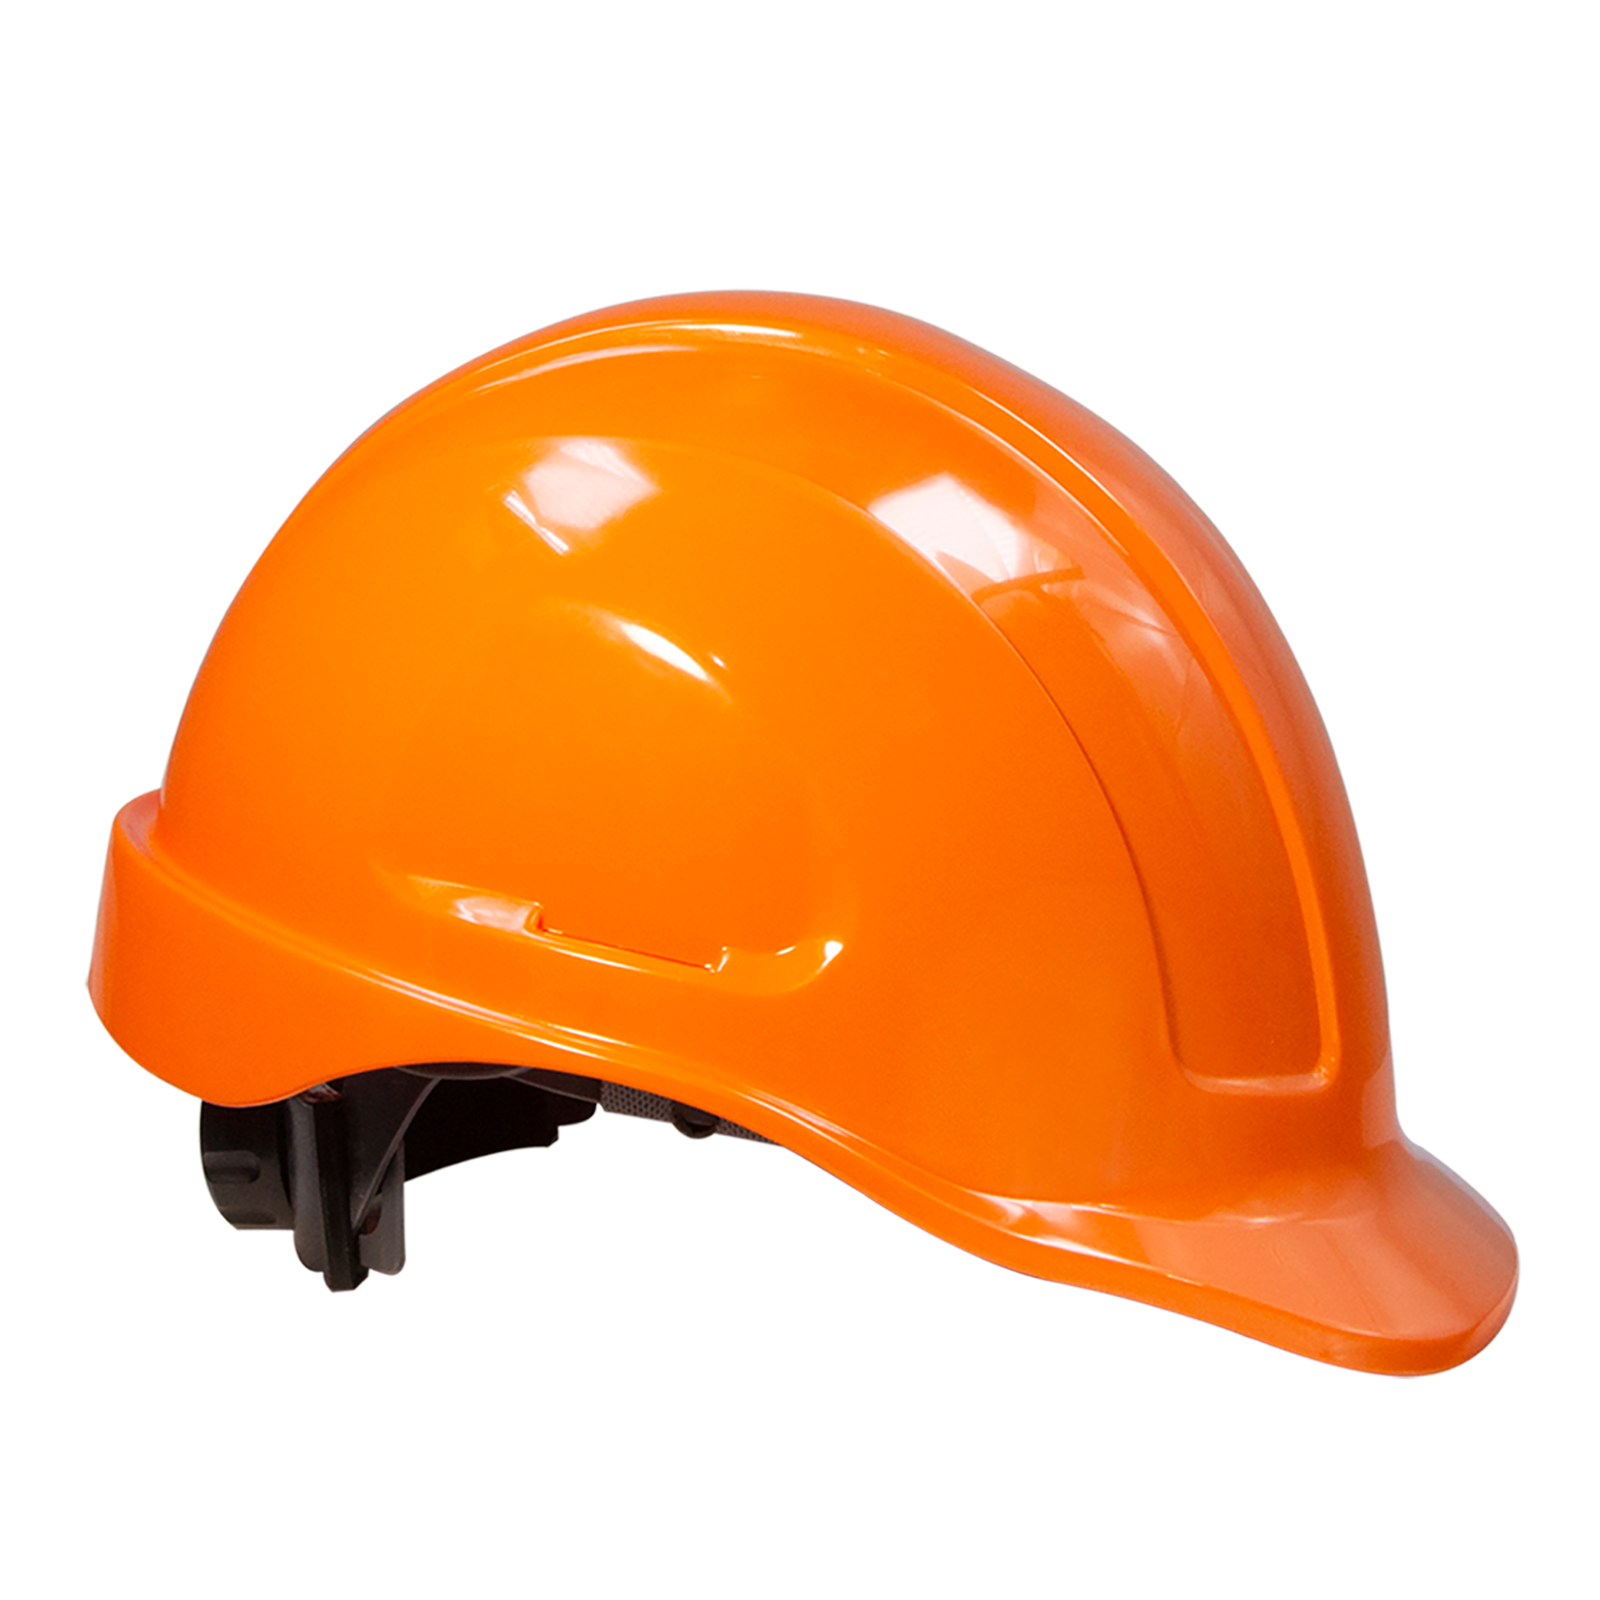 ANSI Compliant Cap stile Hard hat for head protection from falling objects